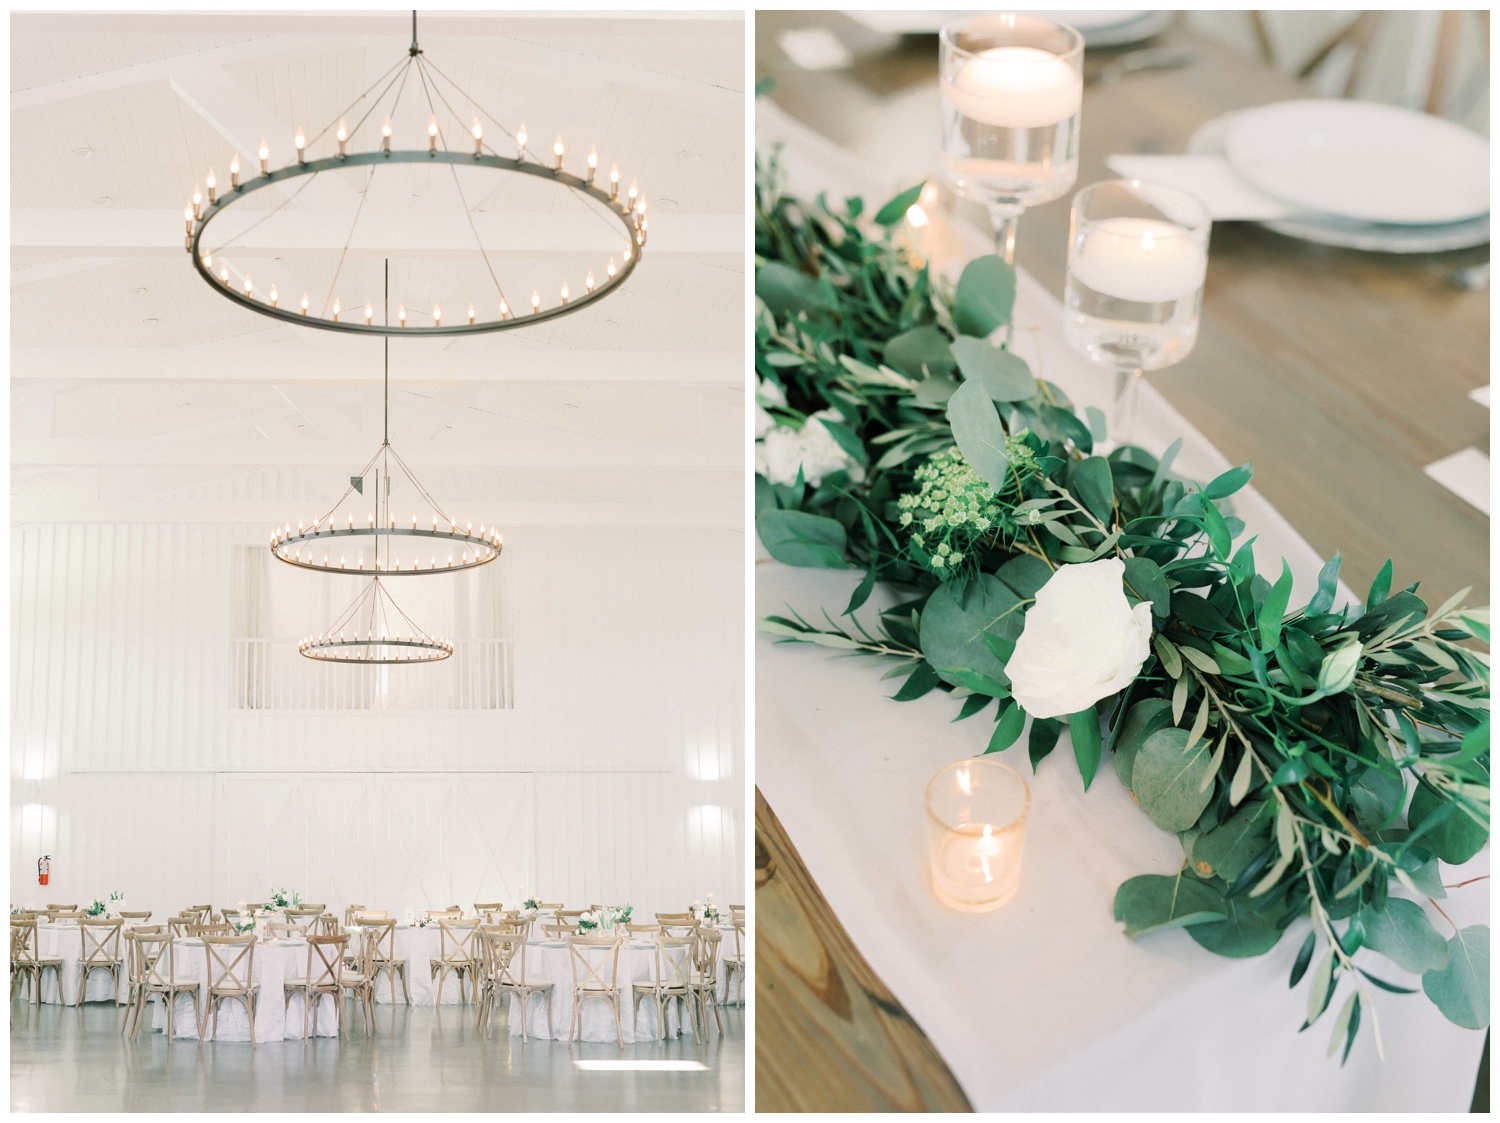 The Farmhouse wedding reception hall with chandelier and greenery on tables